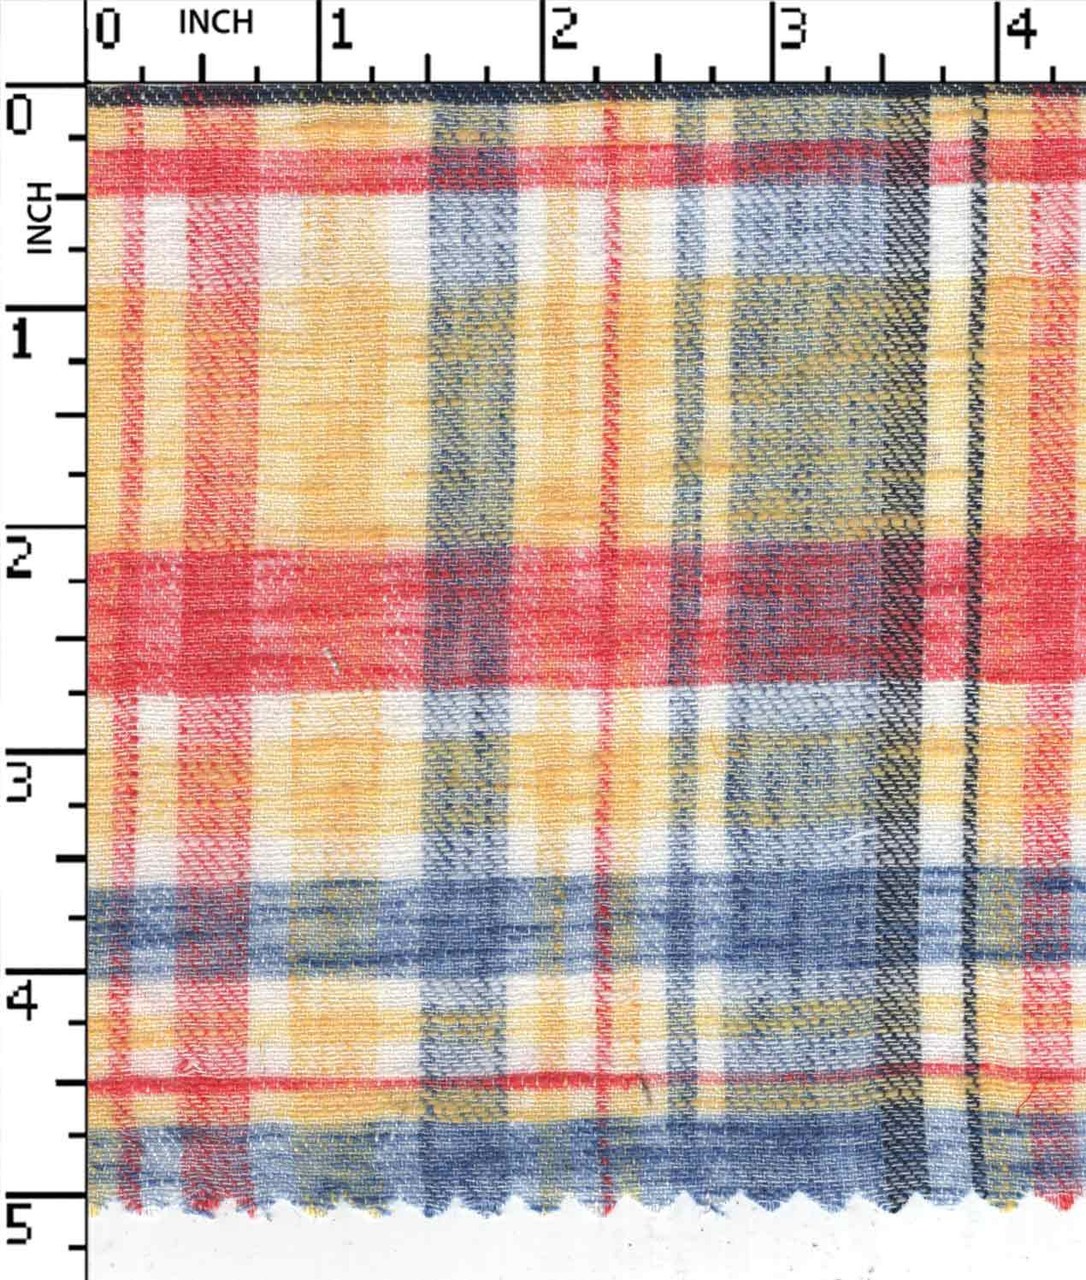 Twill Madras Fabric, brushed like flannel or plain twill madras, for men's shirts, hunting and fishing shirts, and dresses.